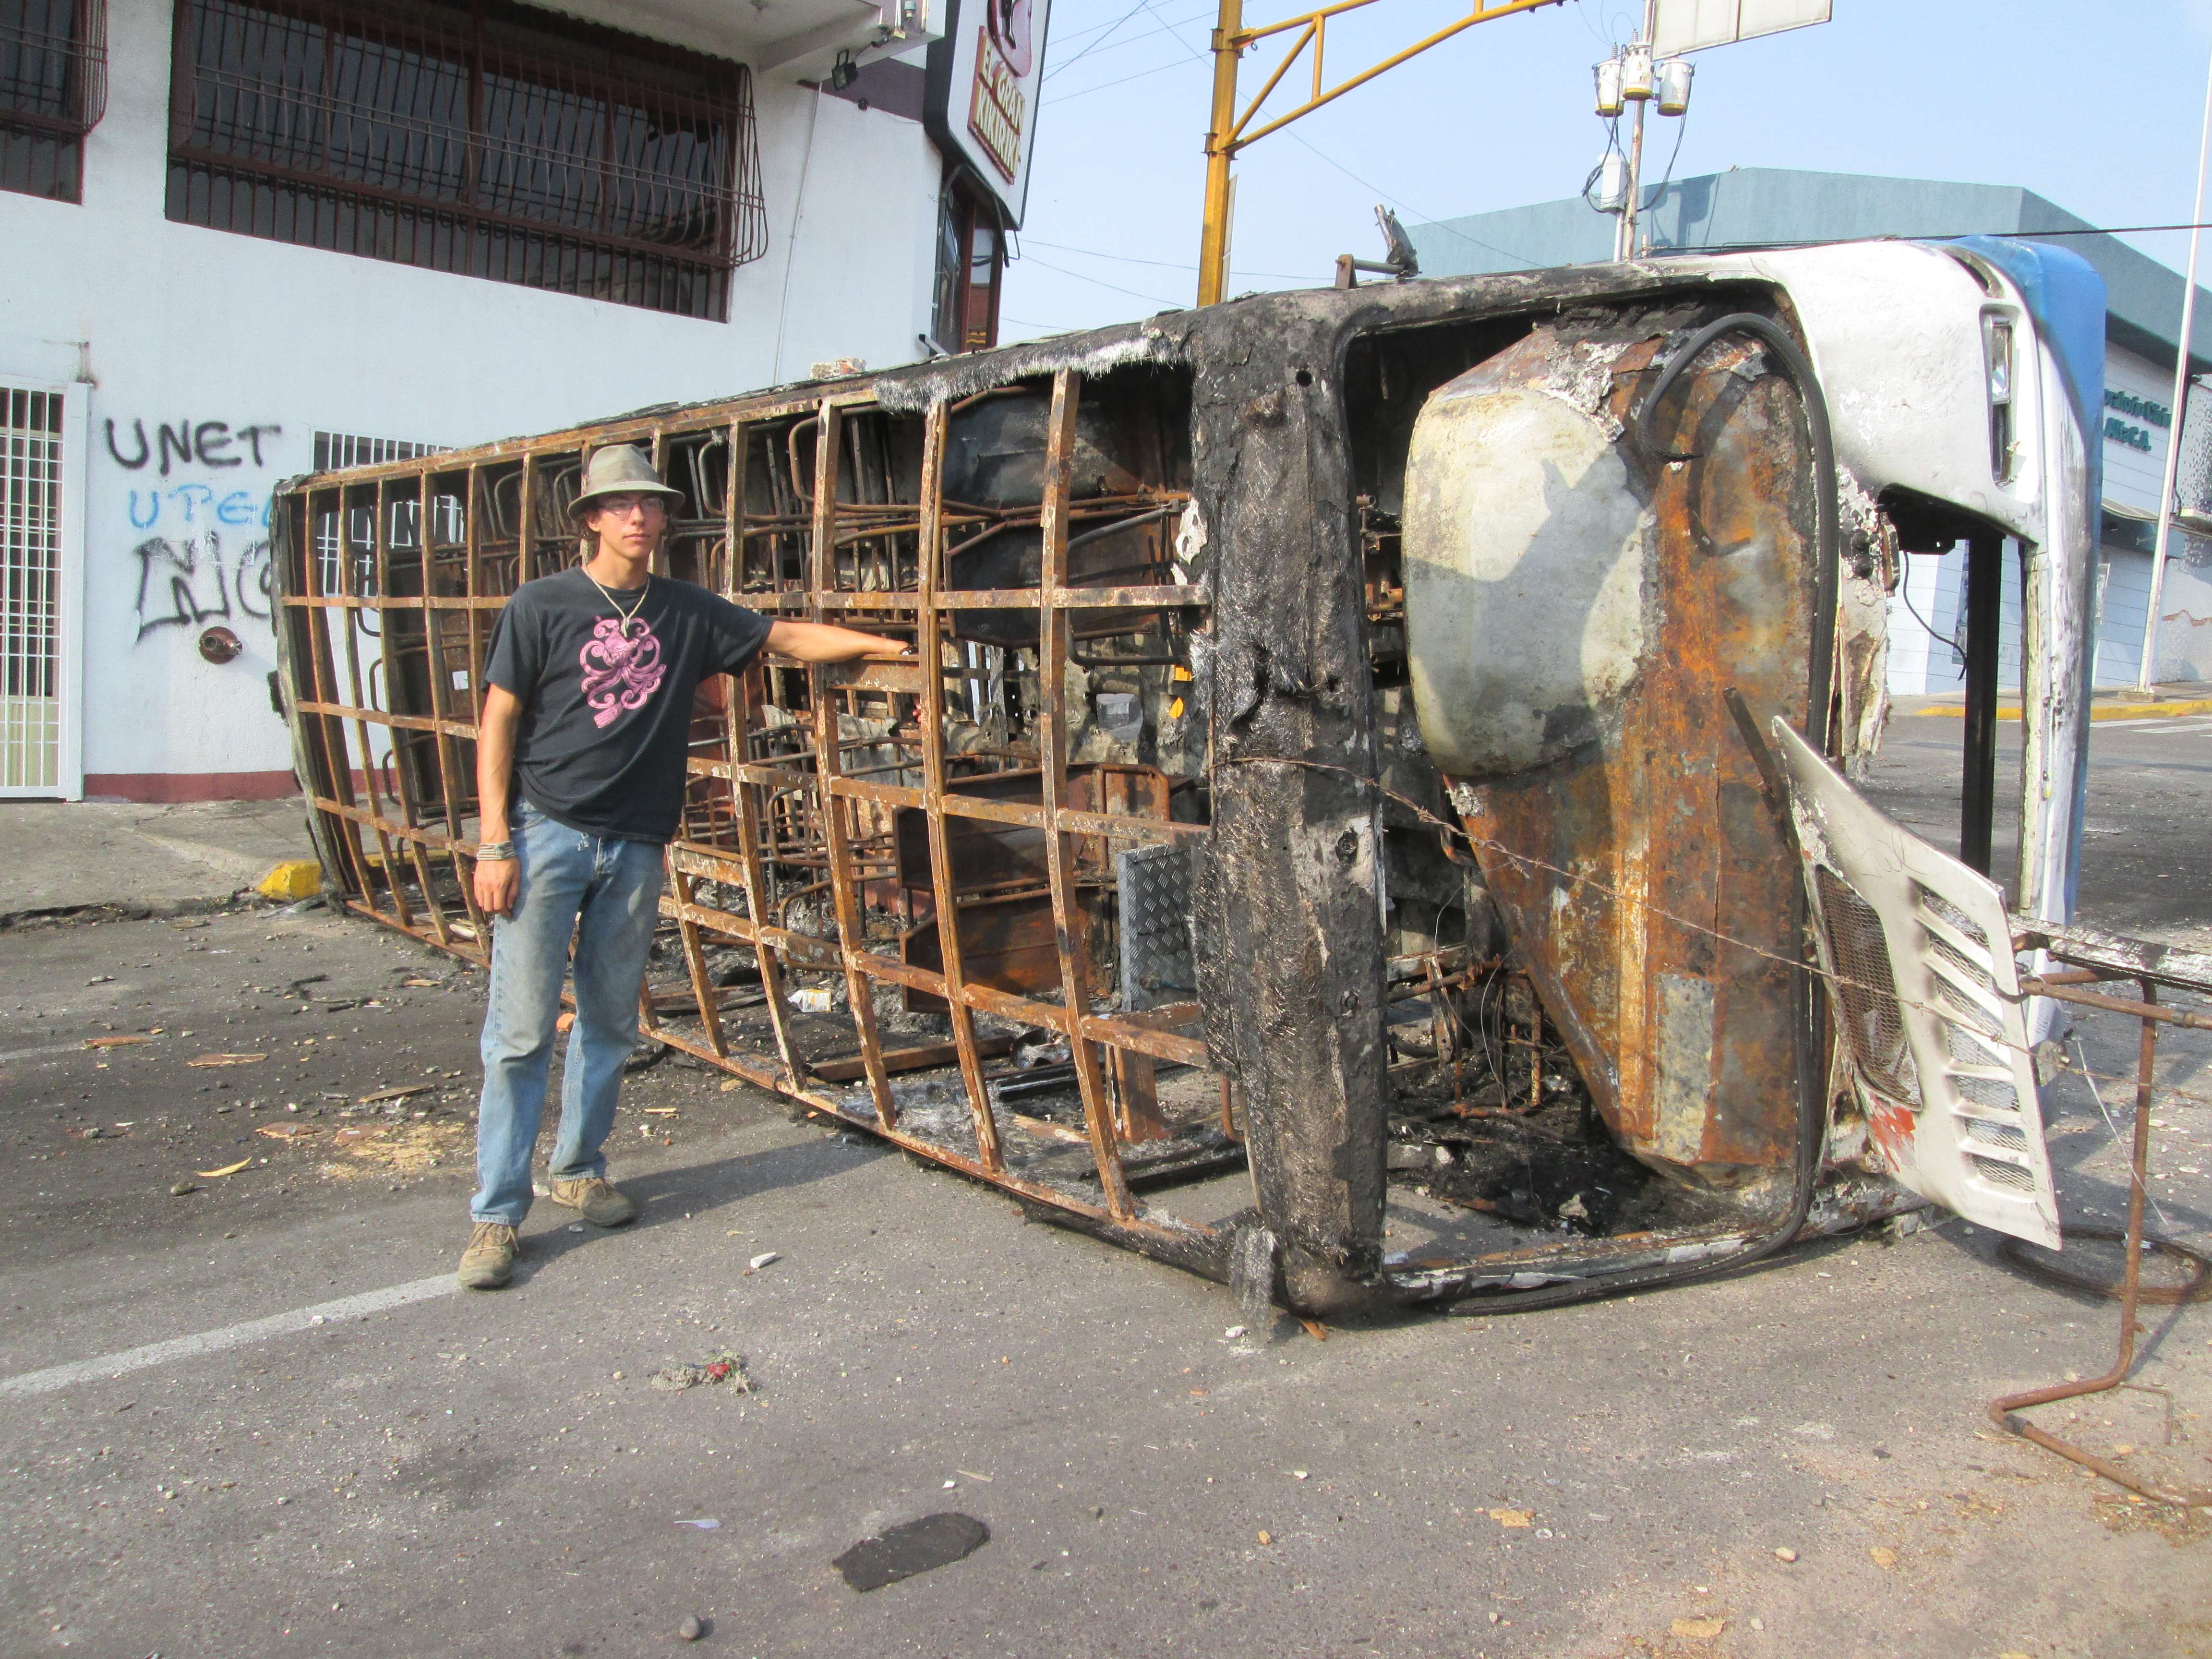 Leaning against a bus that was destroyed in a riot